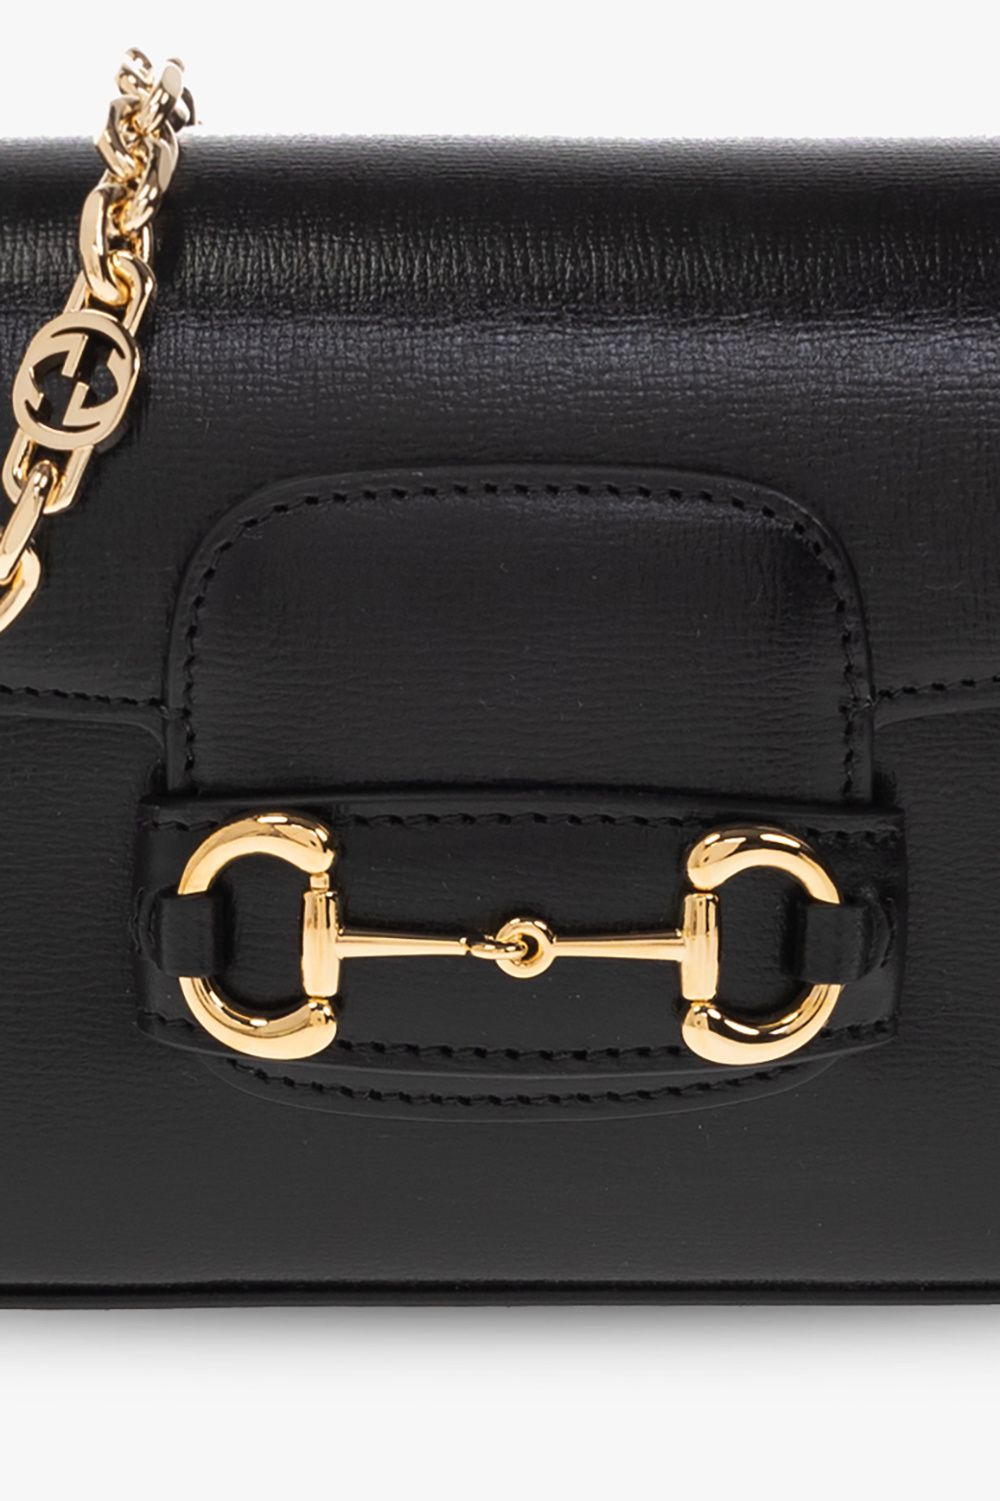 Gucci Horsebit Chain small shoulder bag in grey leather